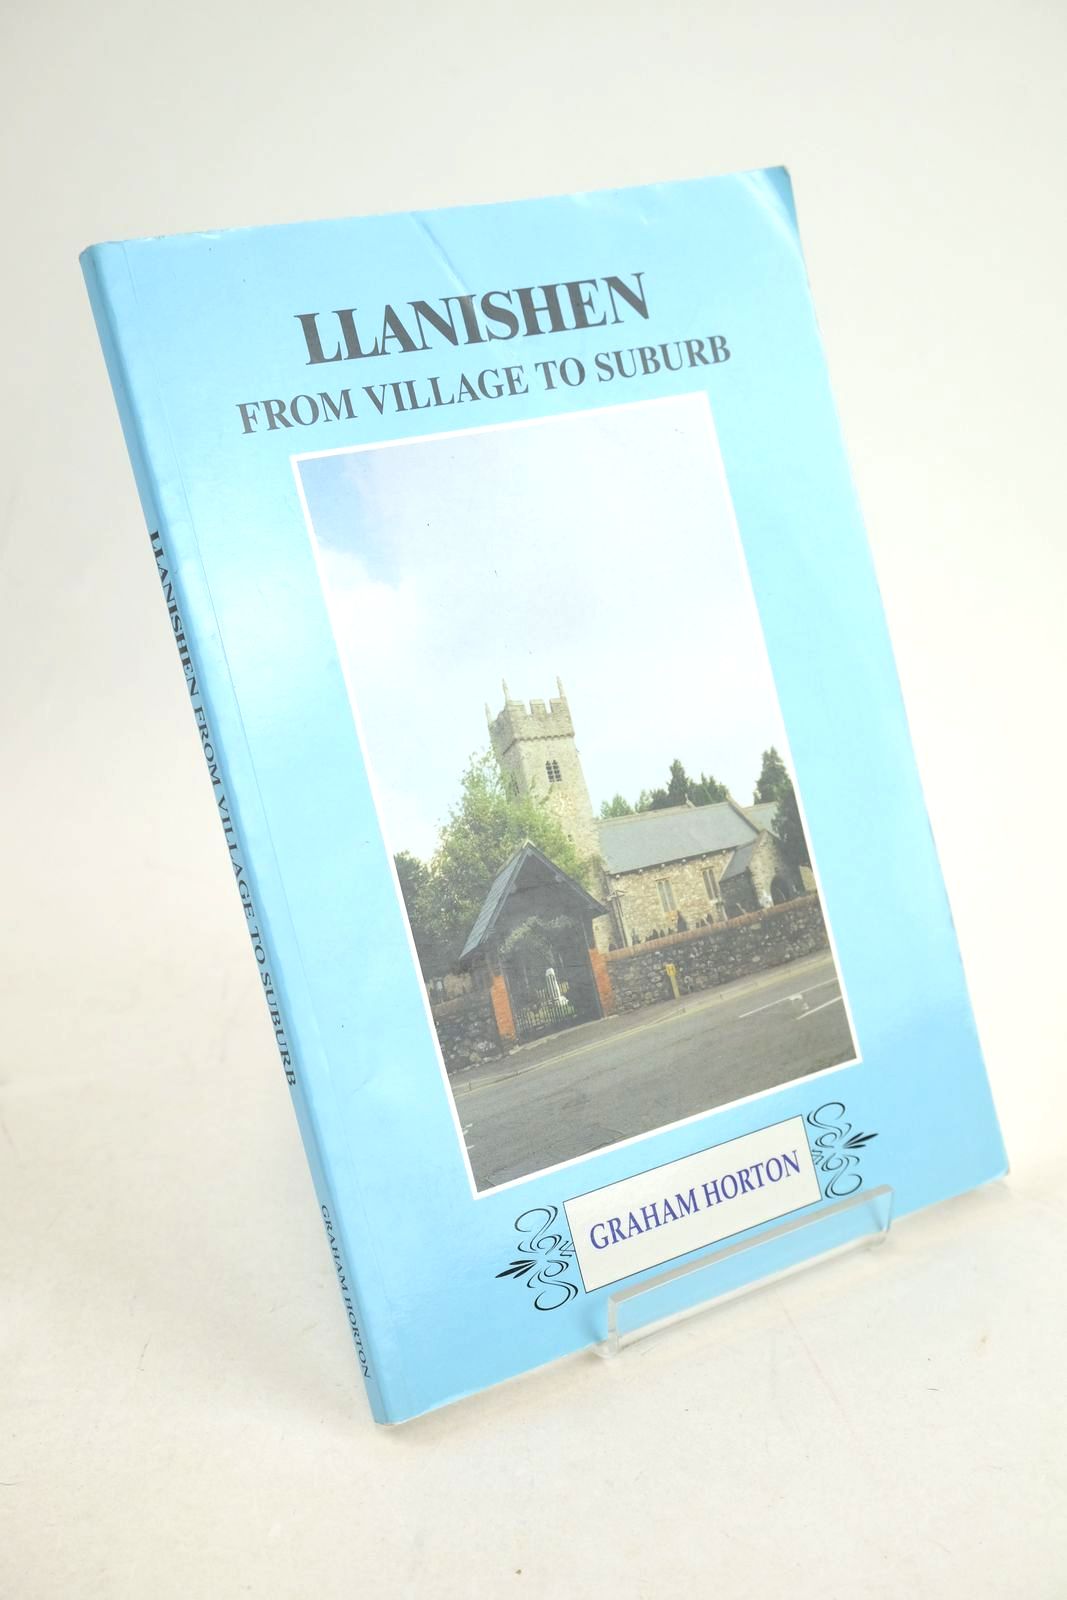 Photo of LLANISHEN FROM VILLAGE TO SUBURB written by Horton, Graham published by Graham Horton (STOCK CODE: 1327475)  for sale by Stella & Rose's Books